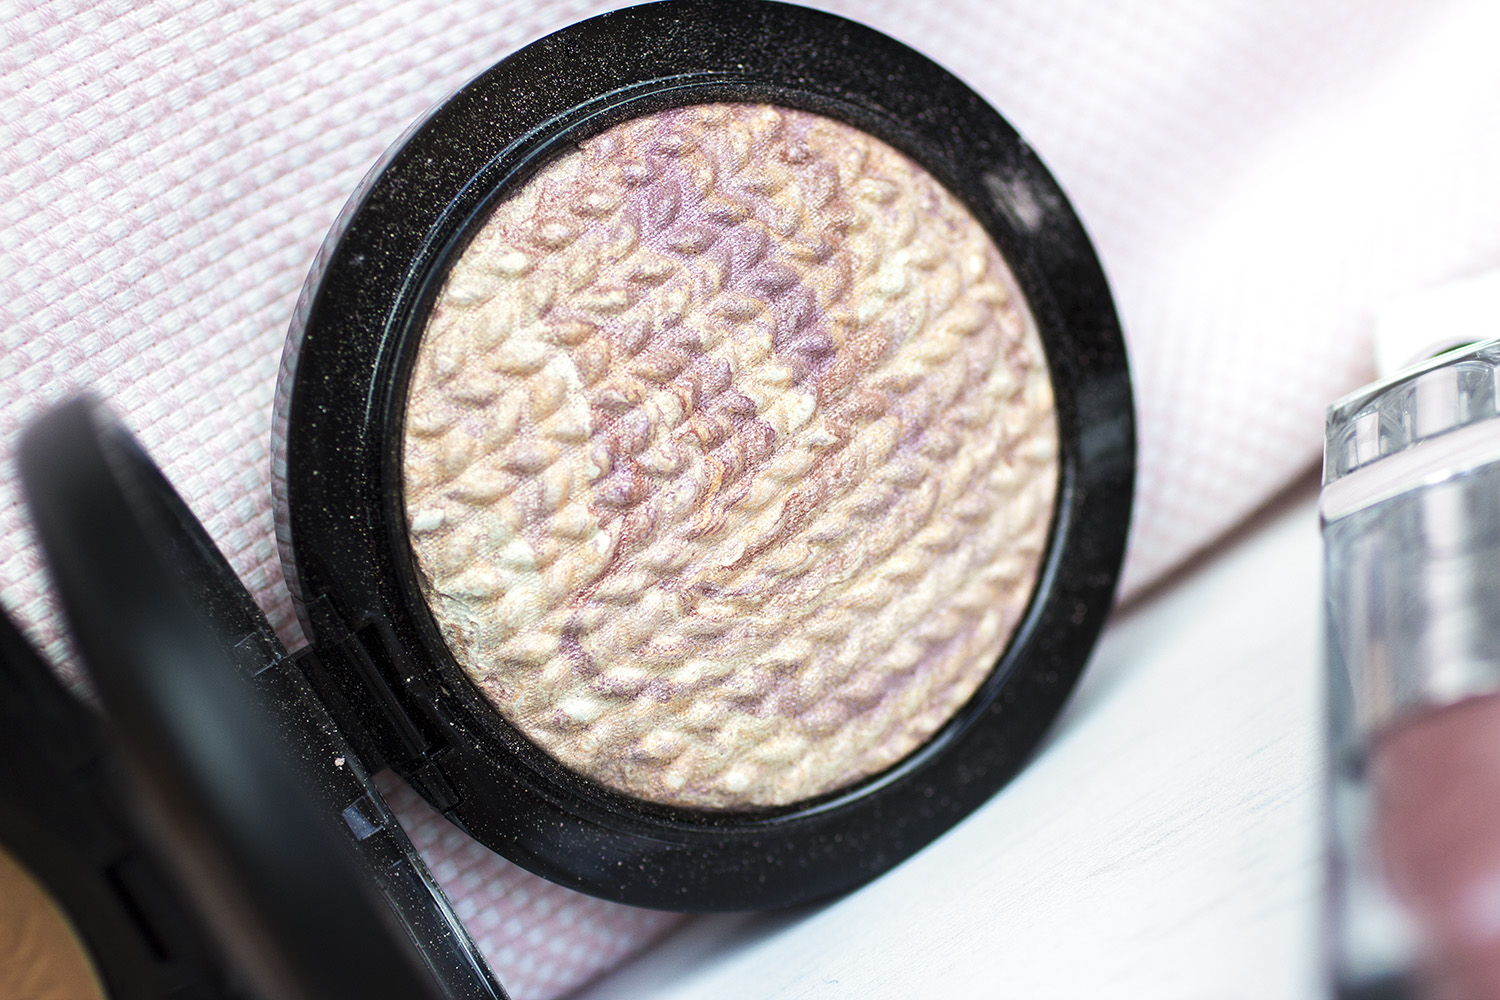 Mineralize Skinfinish / Perfect Topping - MAC